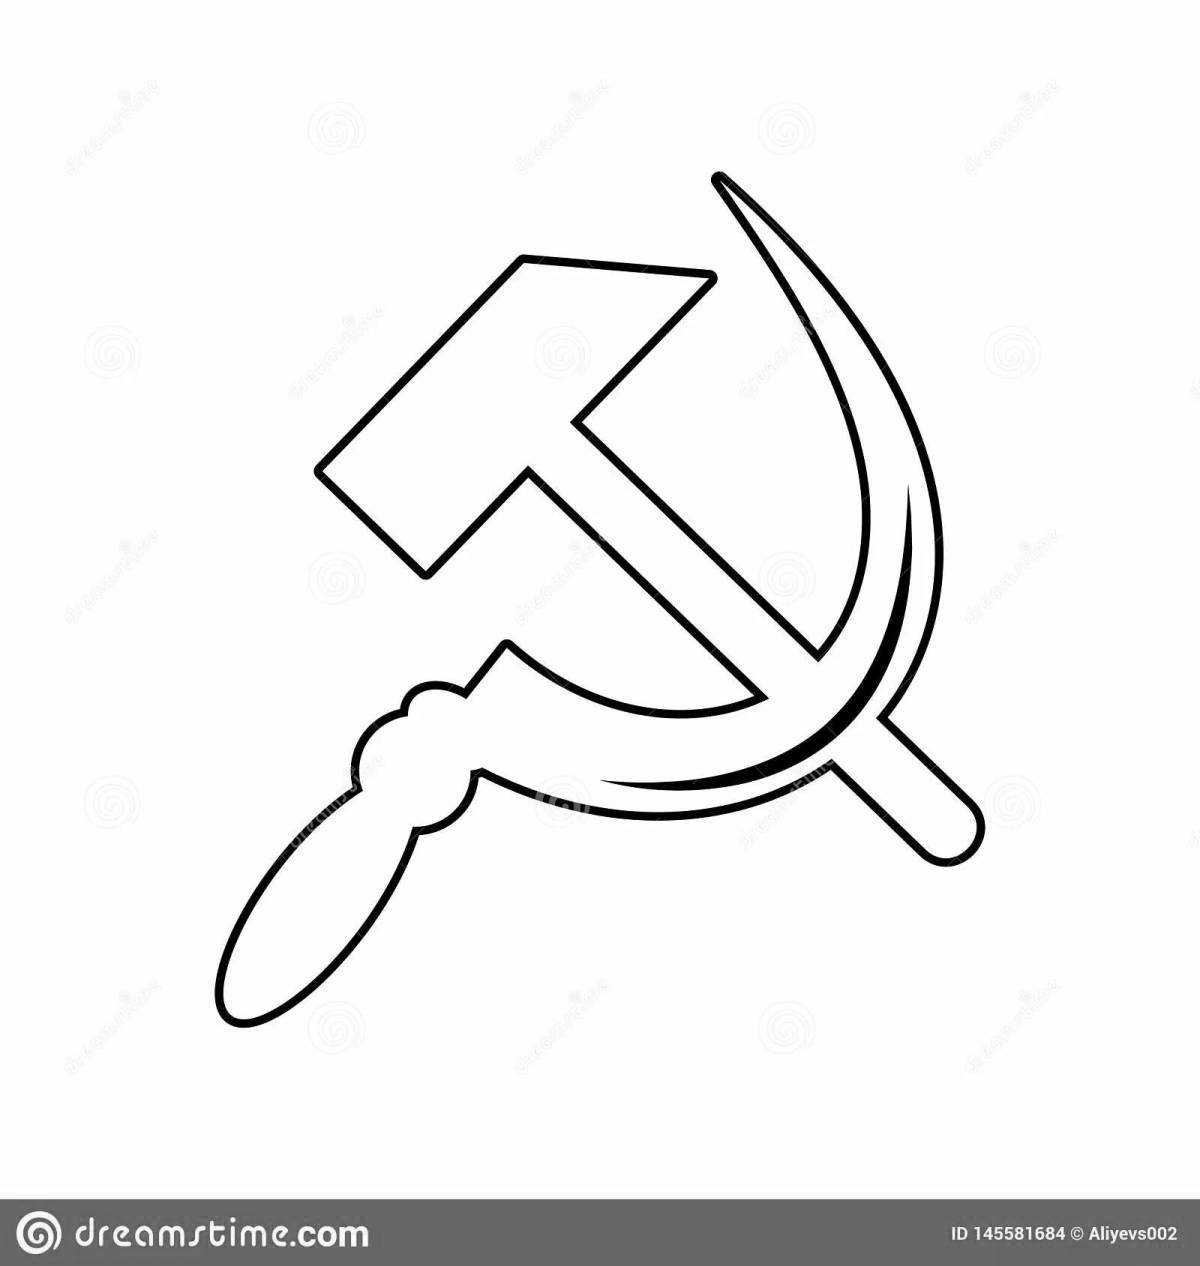 Awesome hammer and sickle coloring page